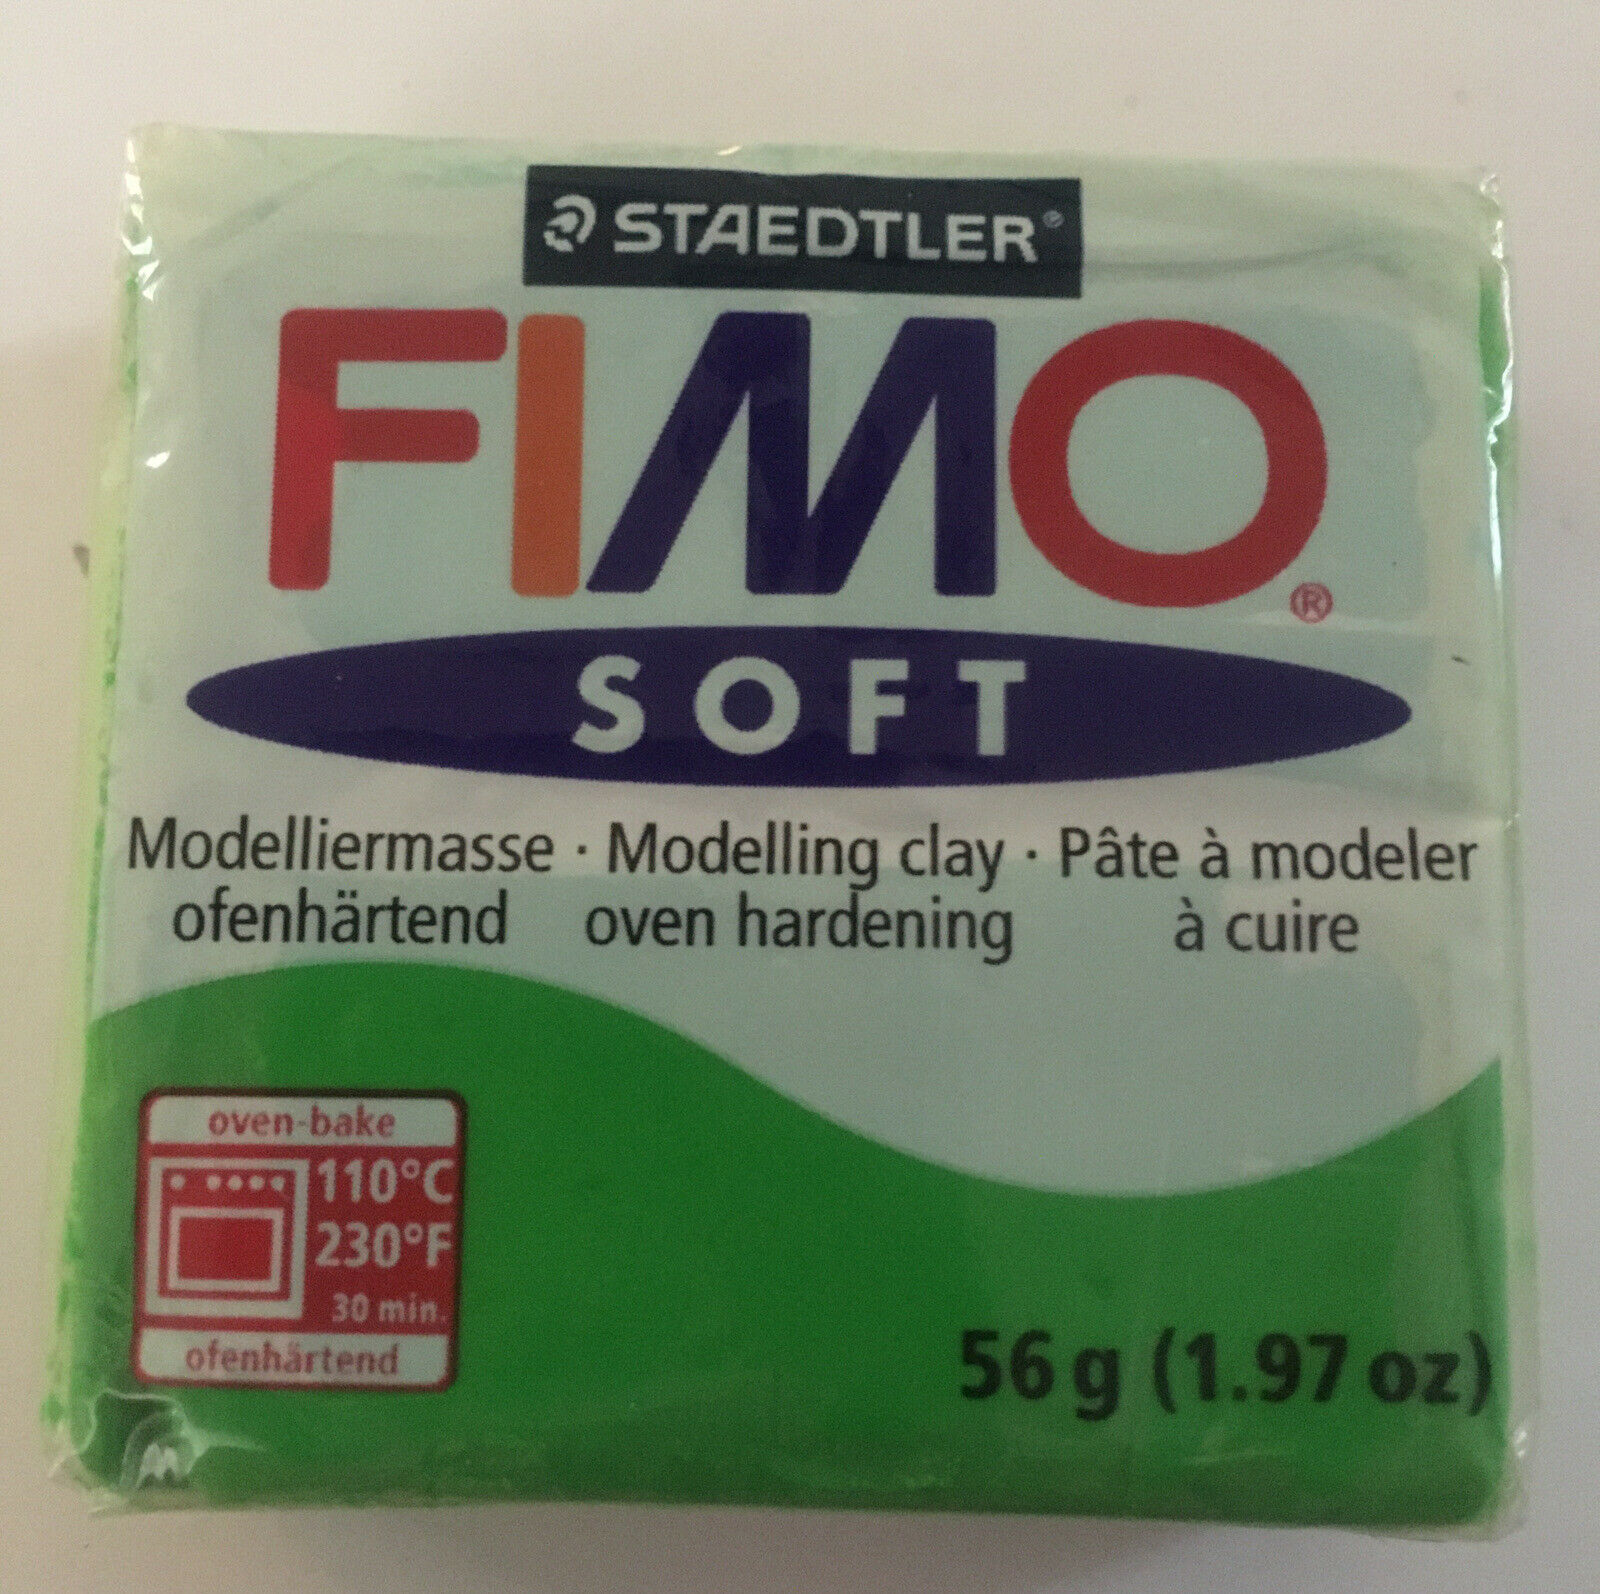 Staedtler Fimo Soft Modelling Polymer Clay 2oz Bar Tropical Green